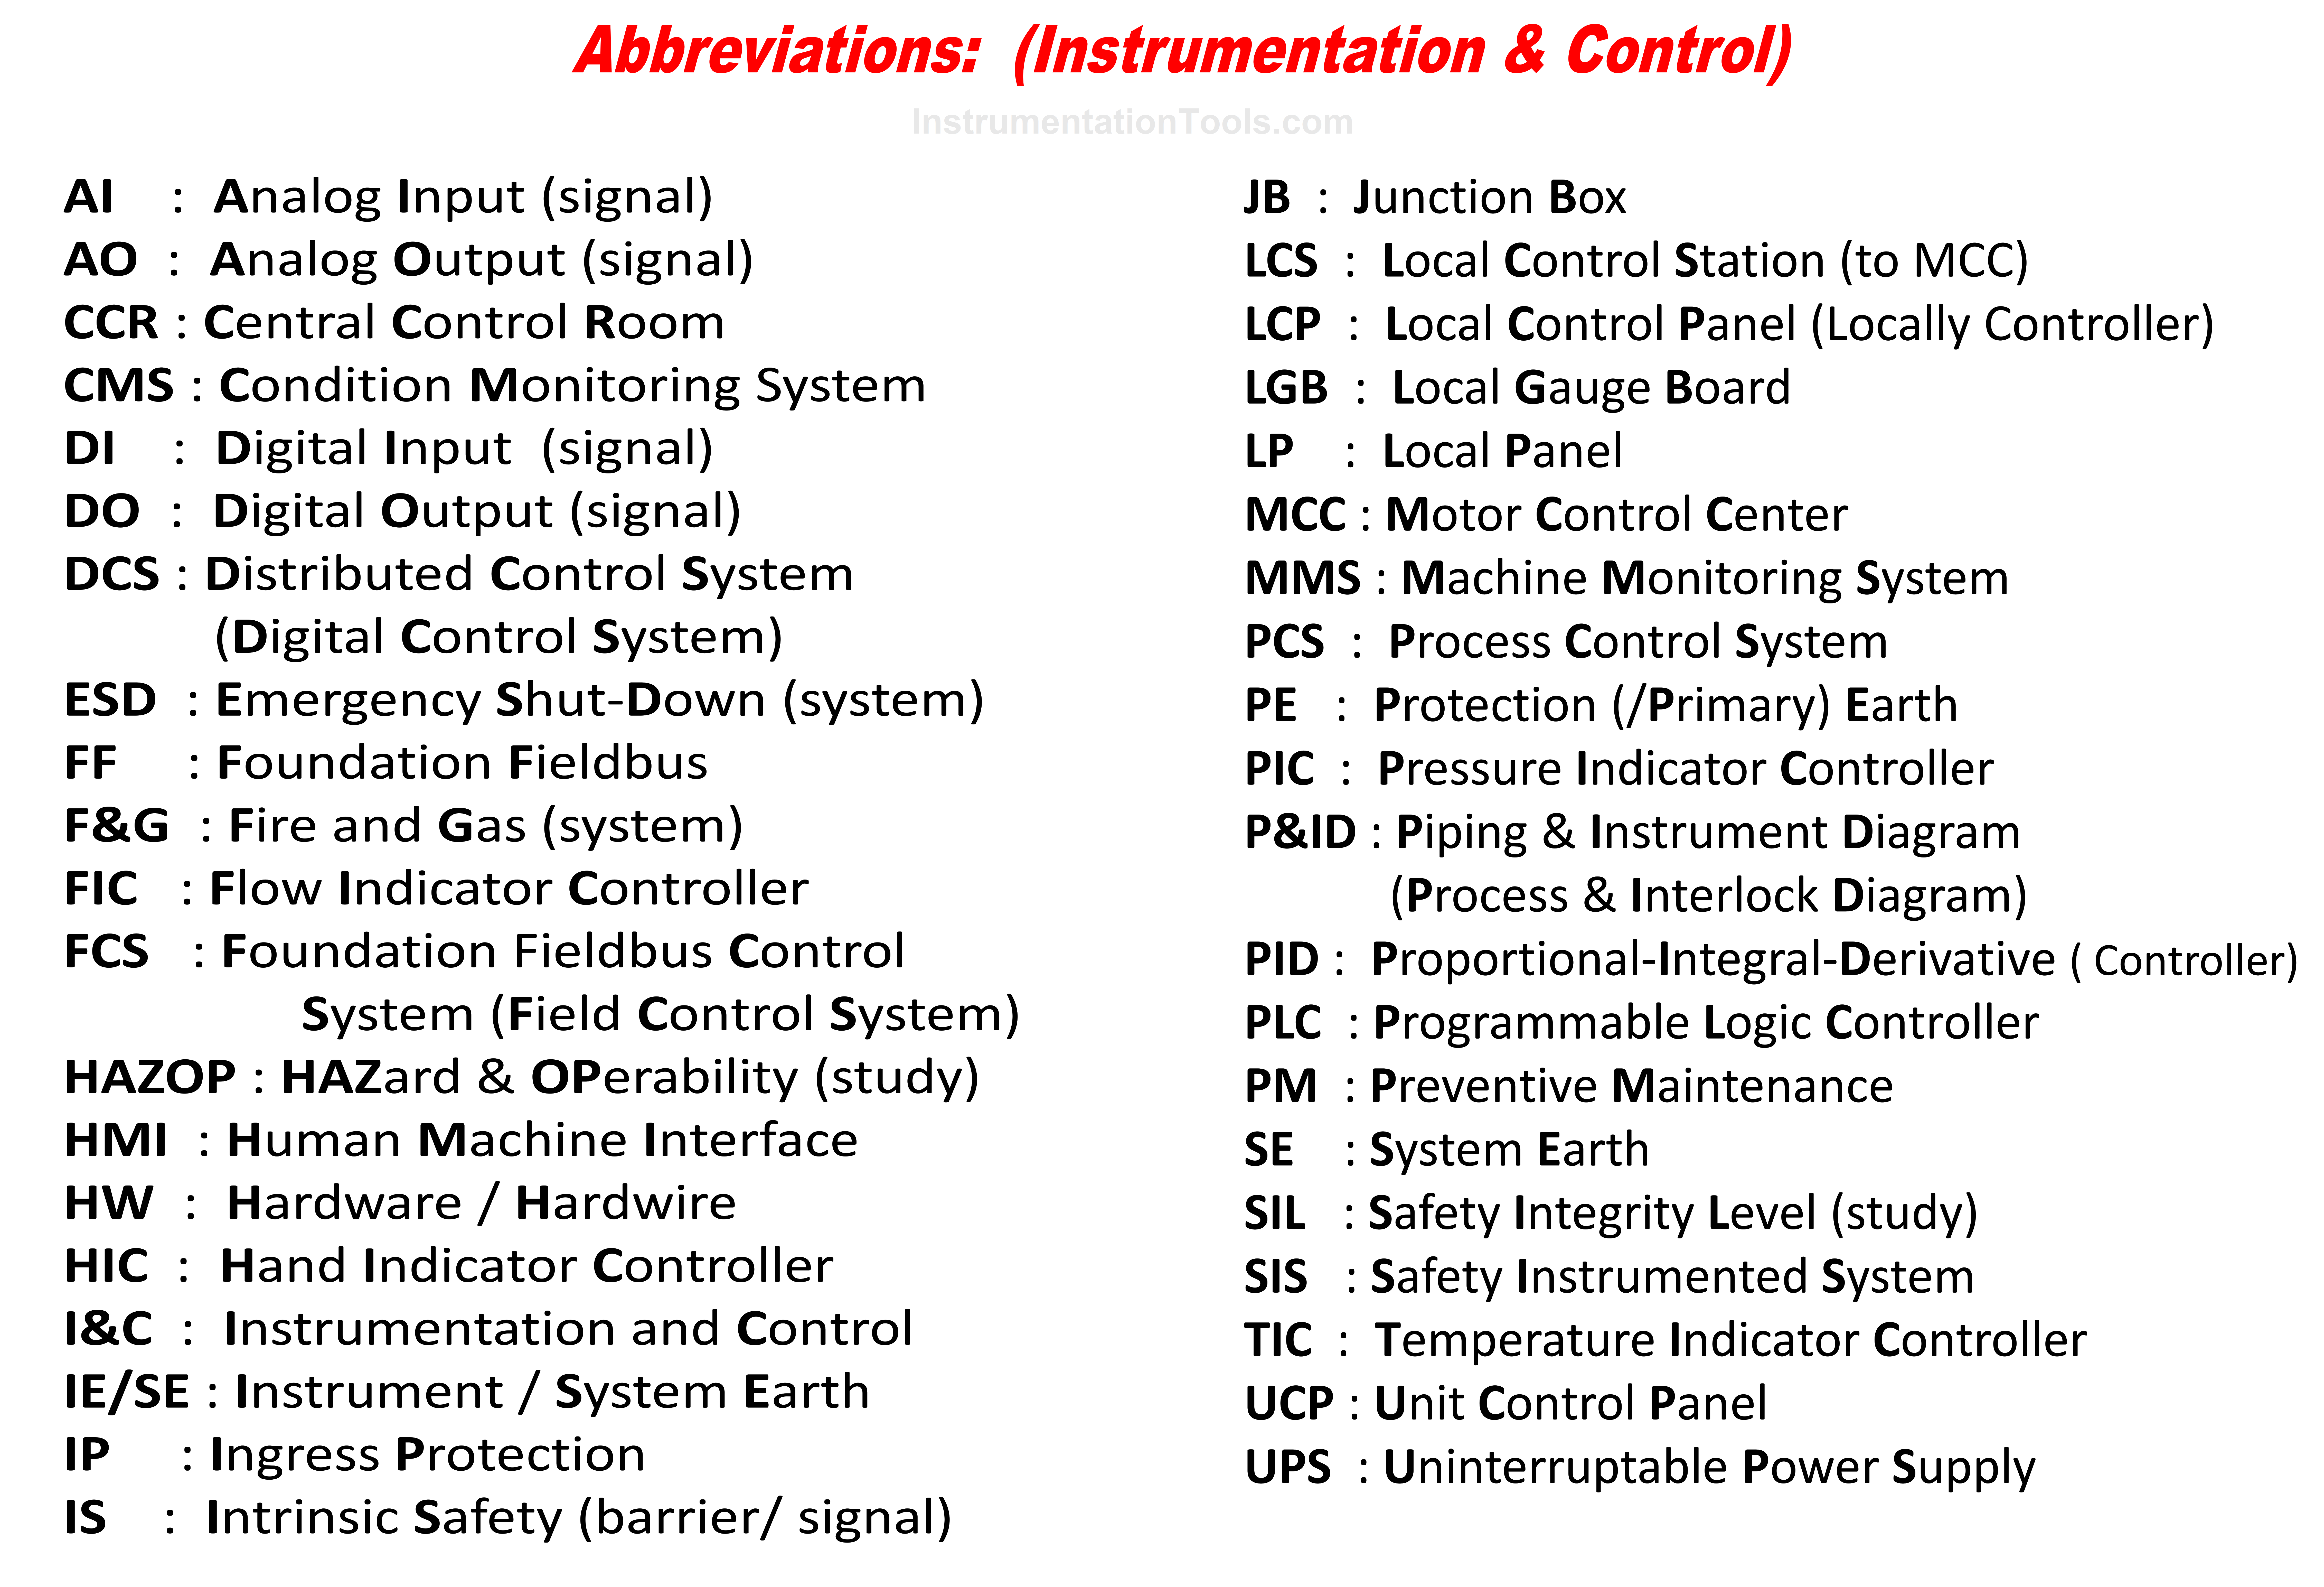 Abbreviations of Instrumentation and Control